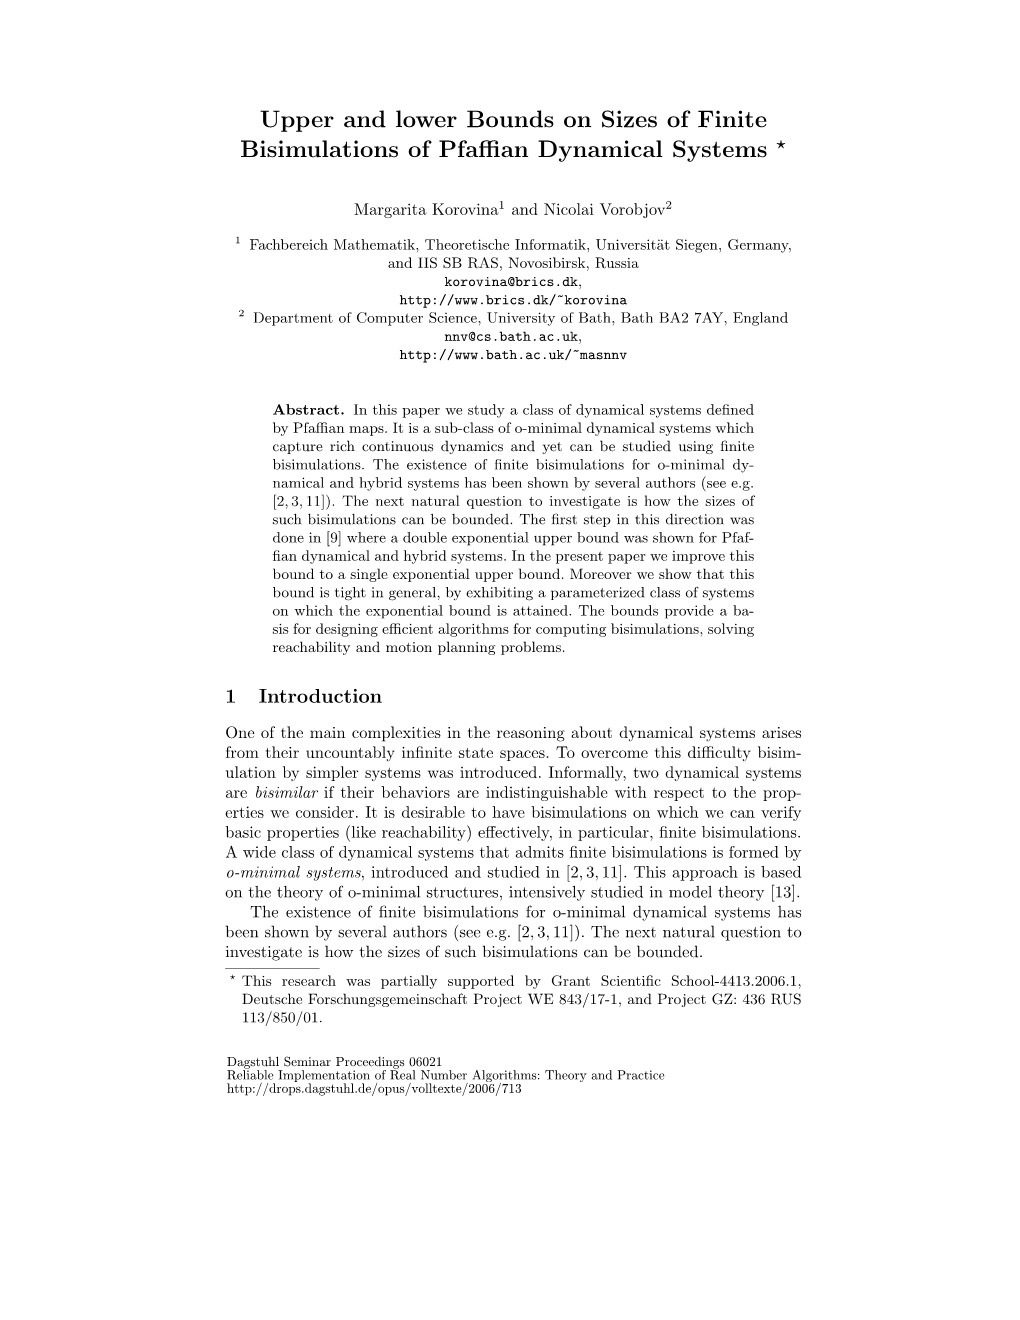 Upper and Lower Bounds on Sizes of Finite Bisimulations of Pfaﬃan Dynamical Systems ⋆